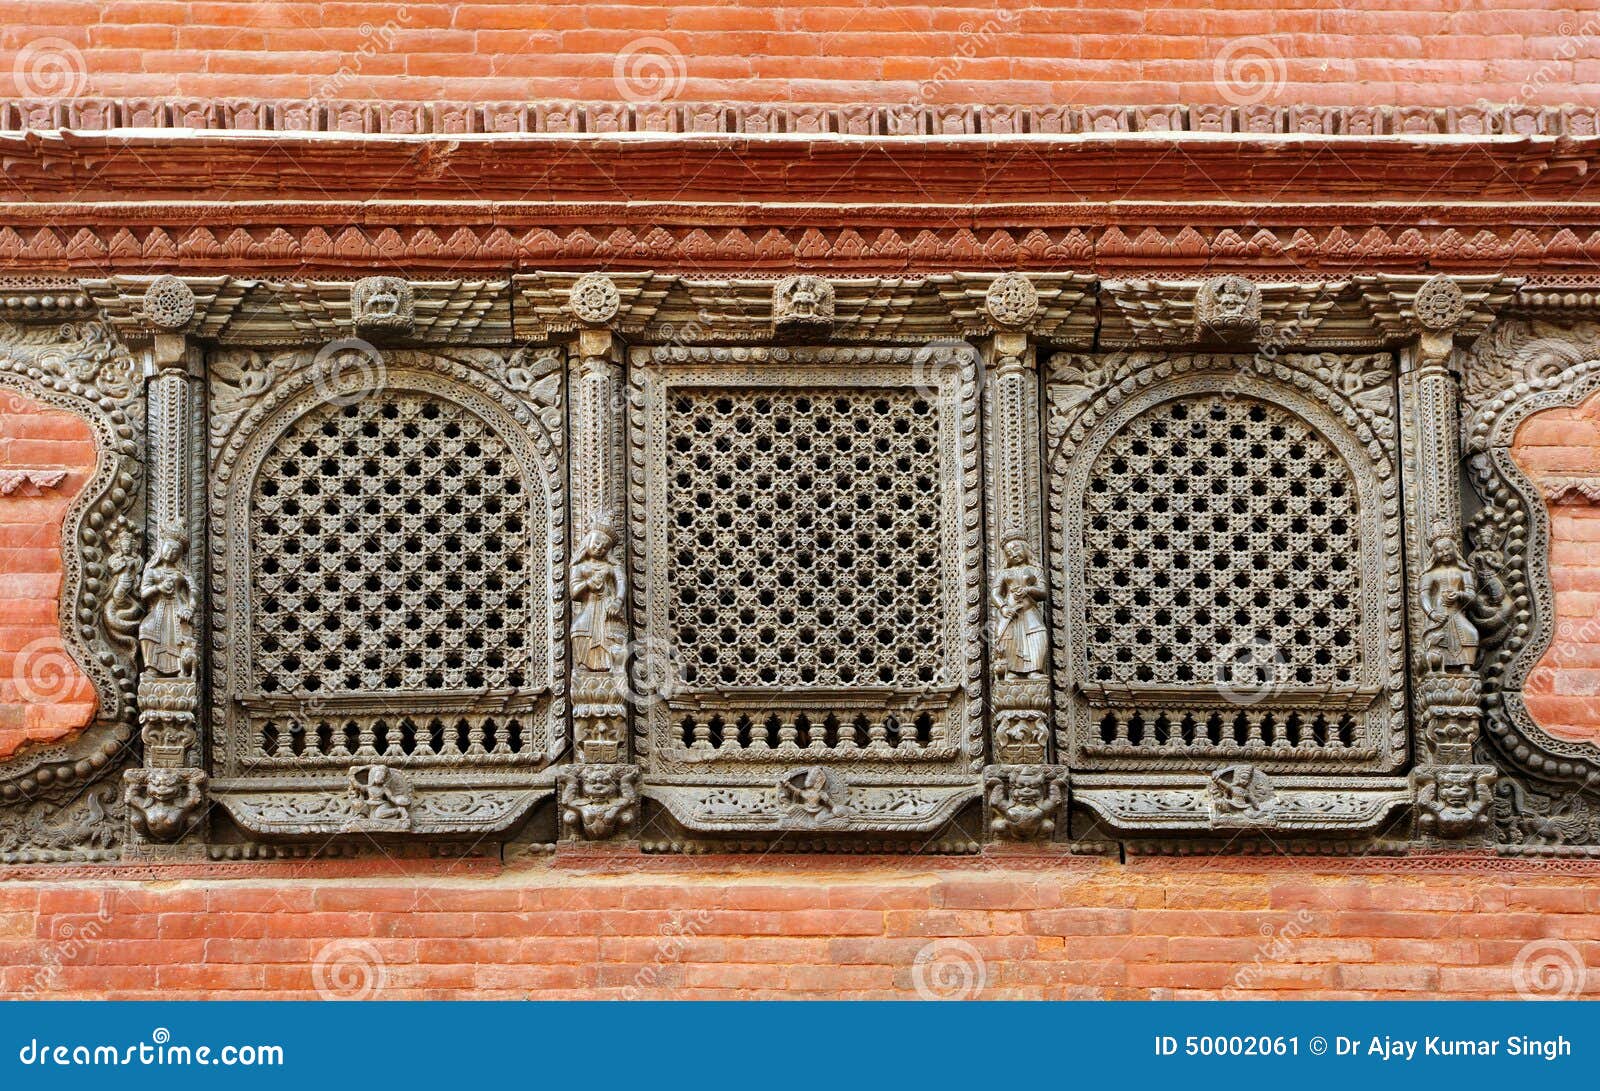 intricate carving on windows